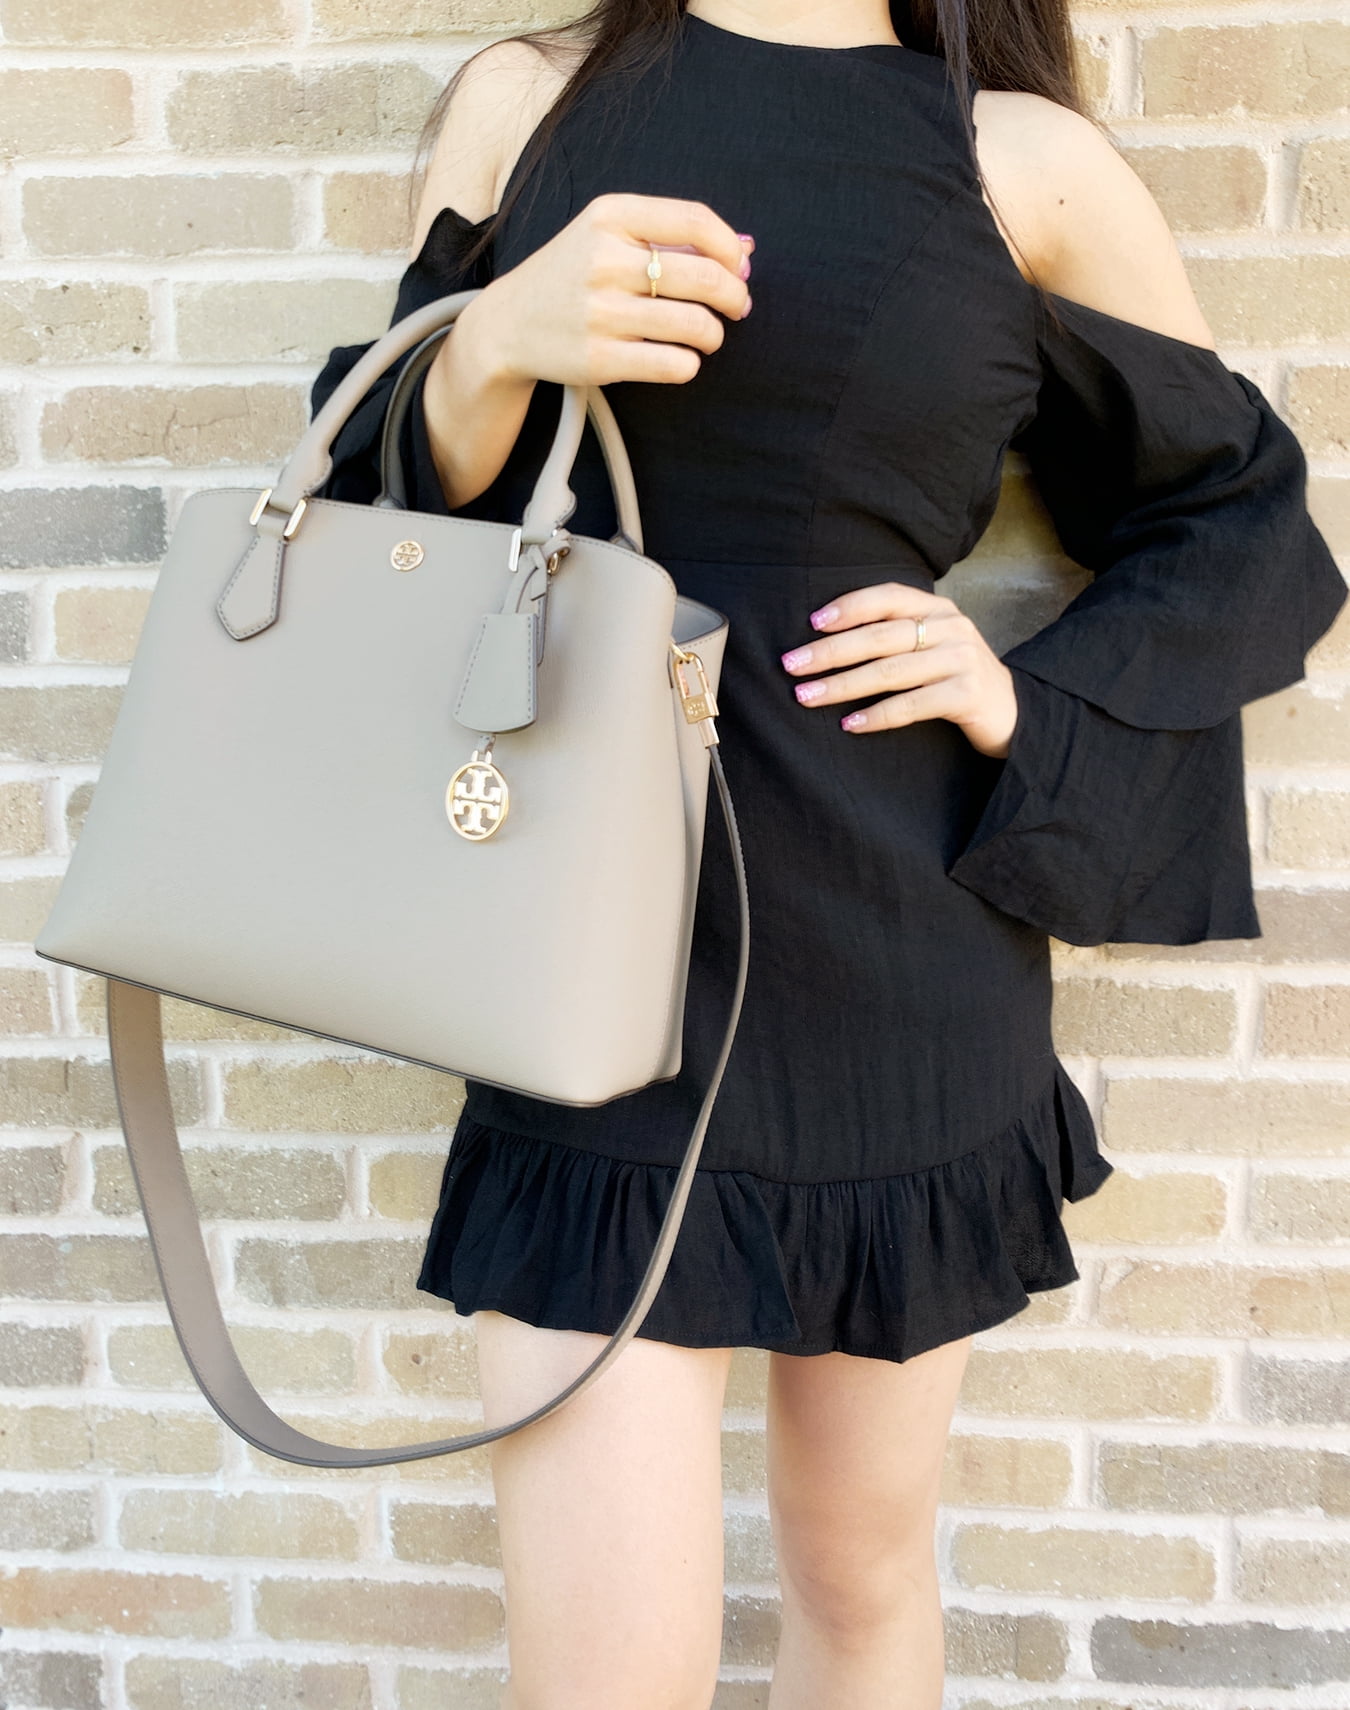 Tory Burch Perry Tote Review - Sizing, Wear & Tear - whatveewore